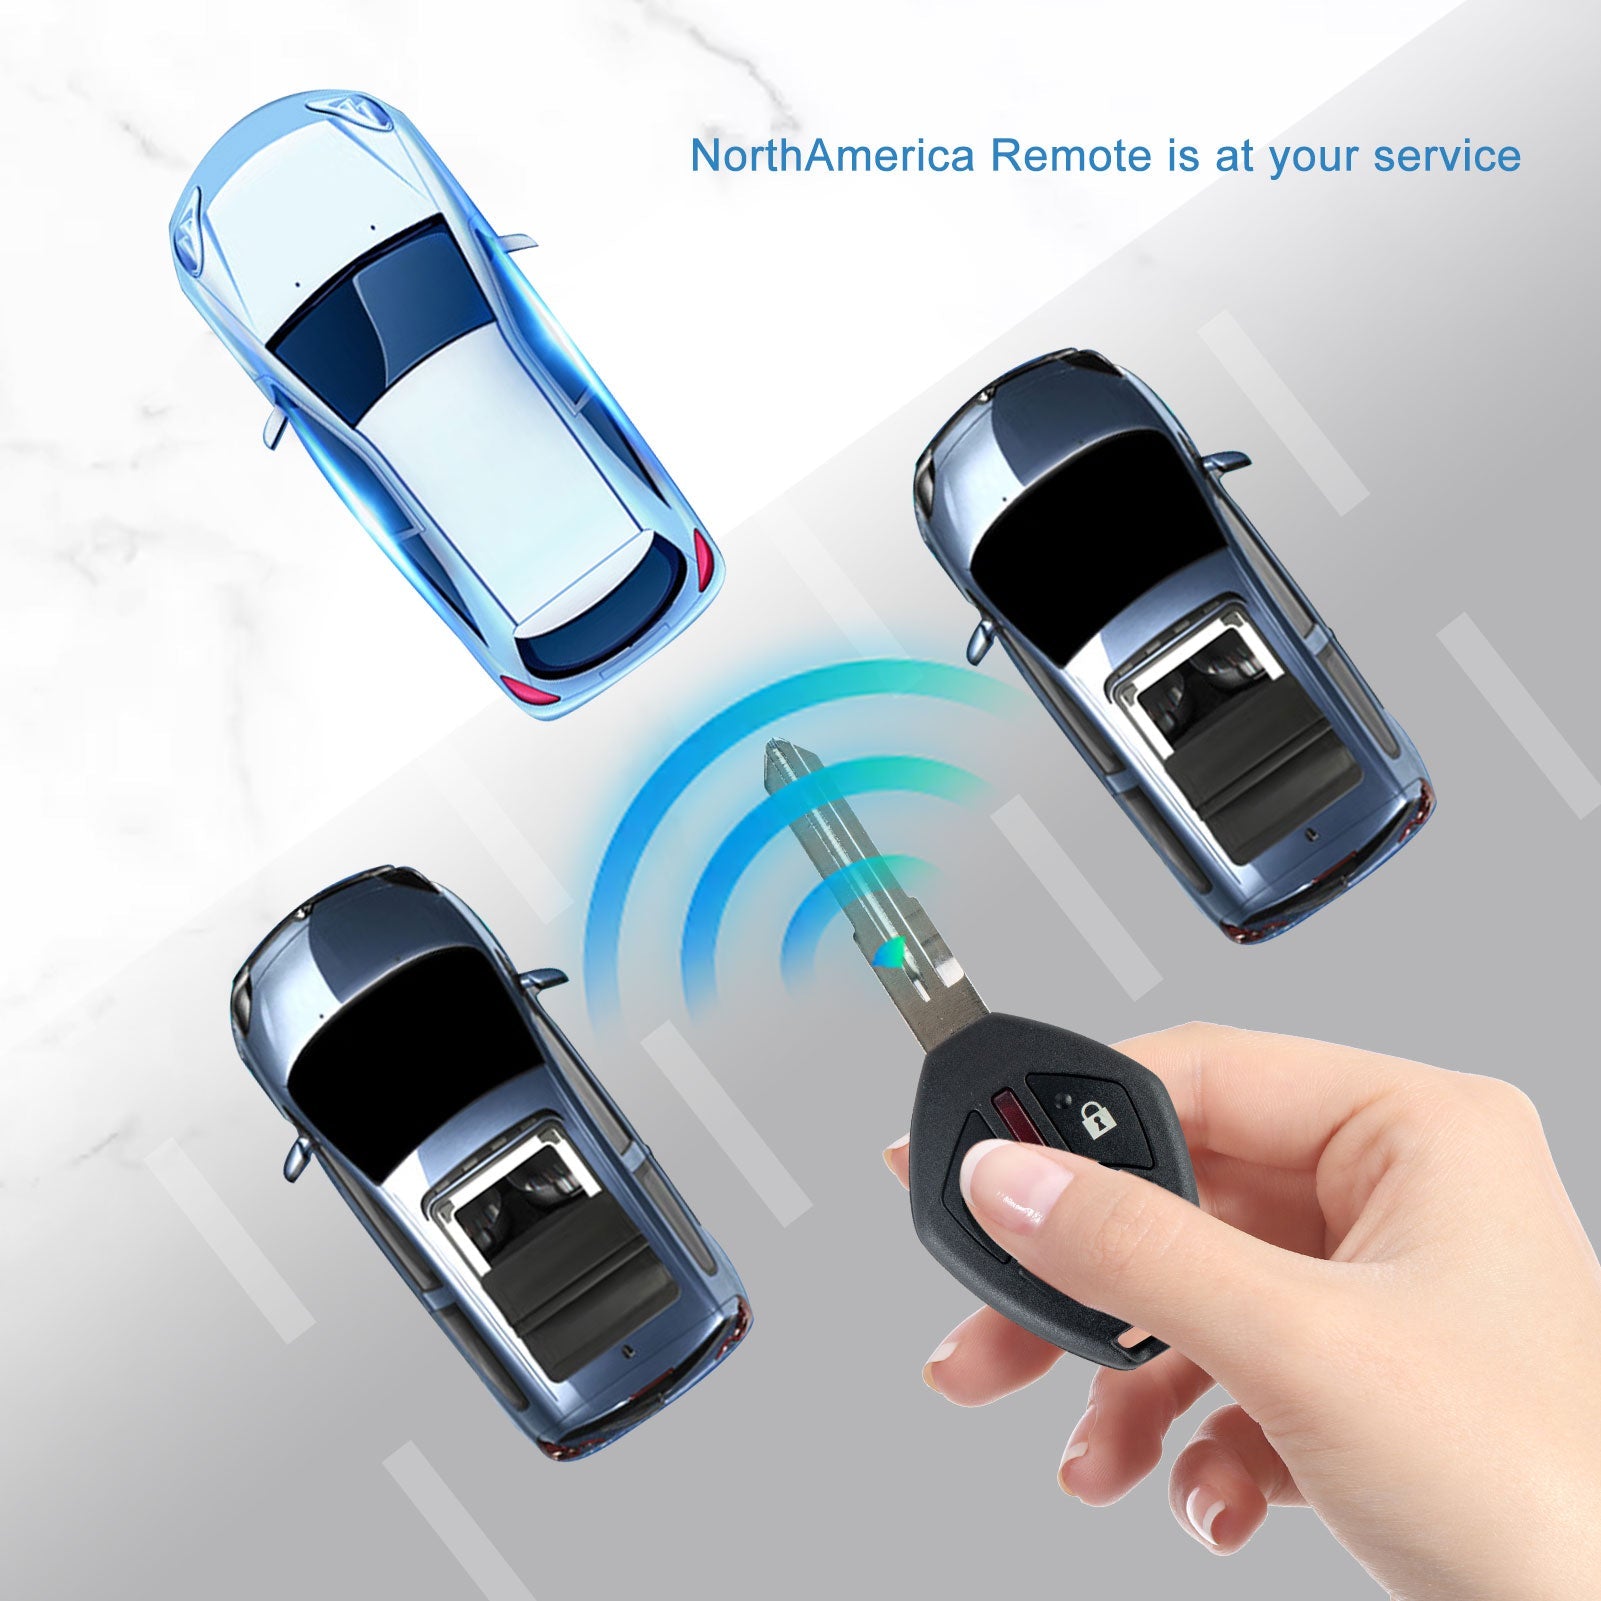 313.8MHZ Keyless Entry Remote Replacment for 2008-2012 Mitsubishi Galant Eclips Remote OUCG8D-620M-A  KR-M4SB-05